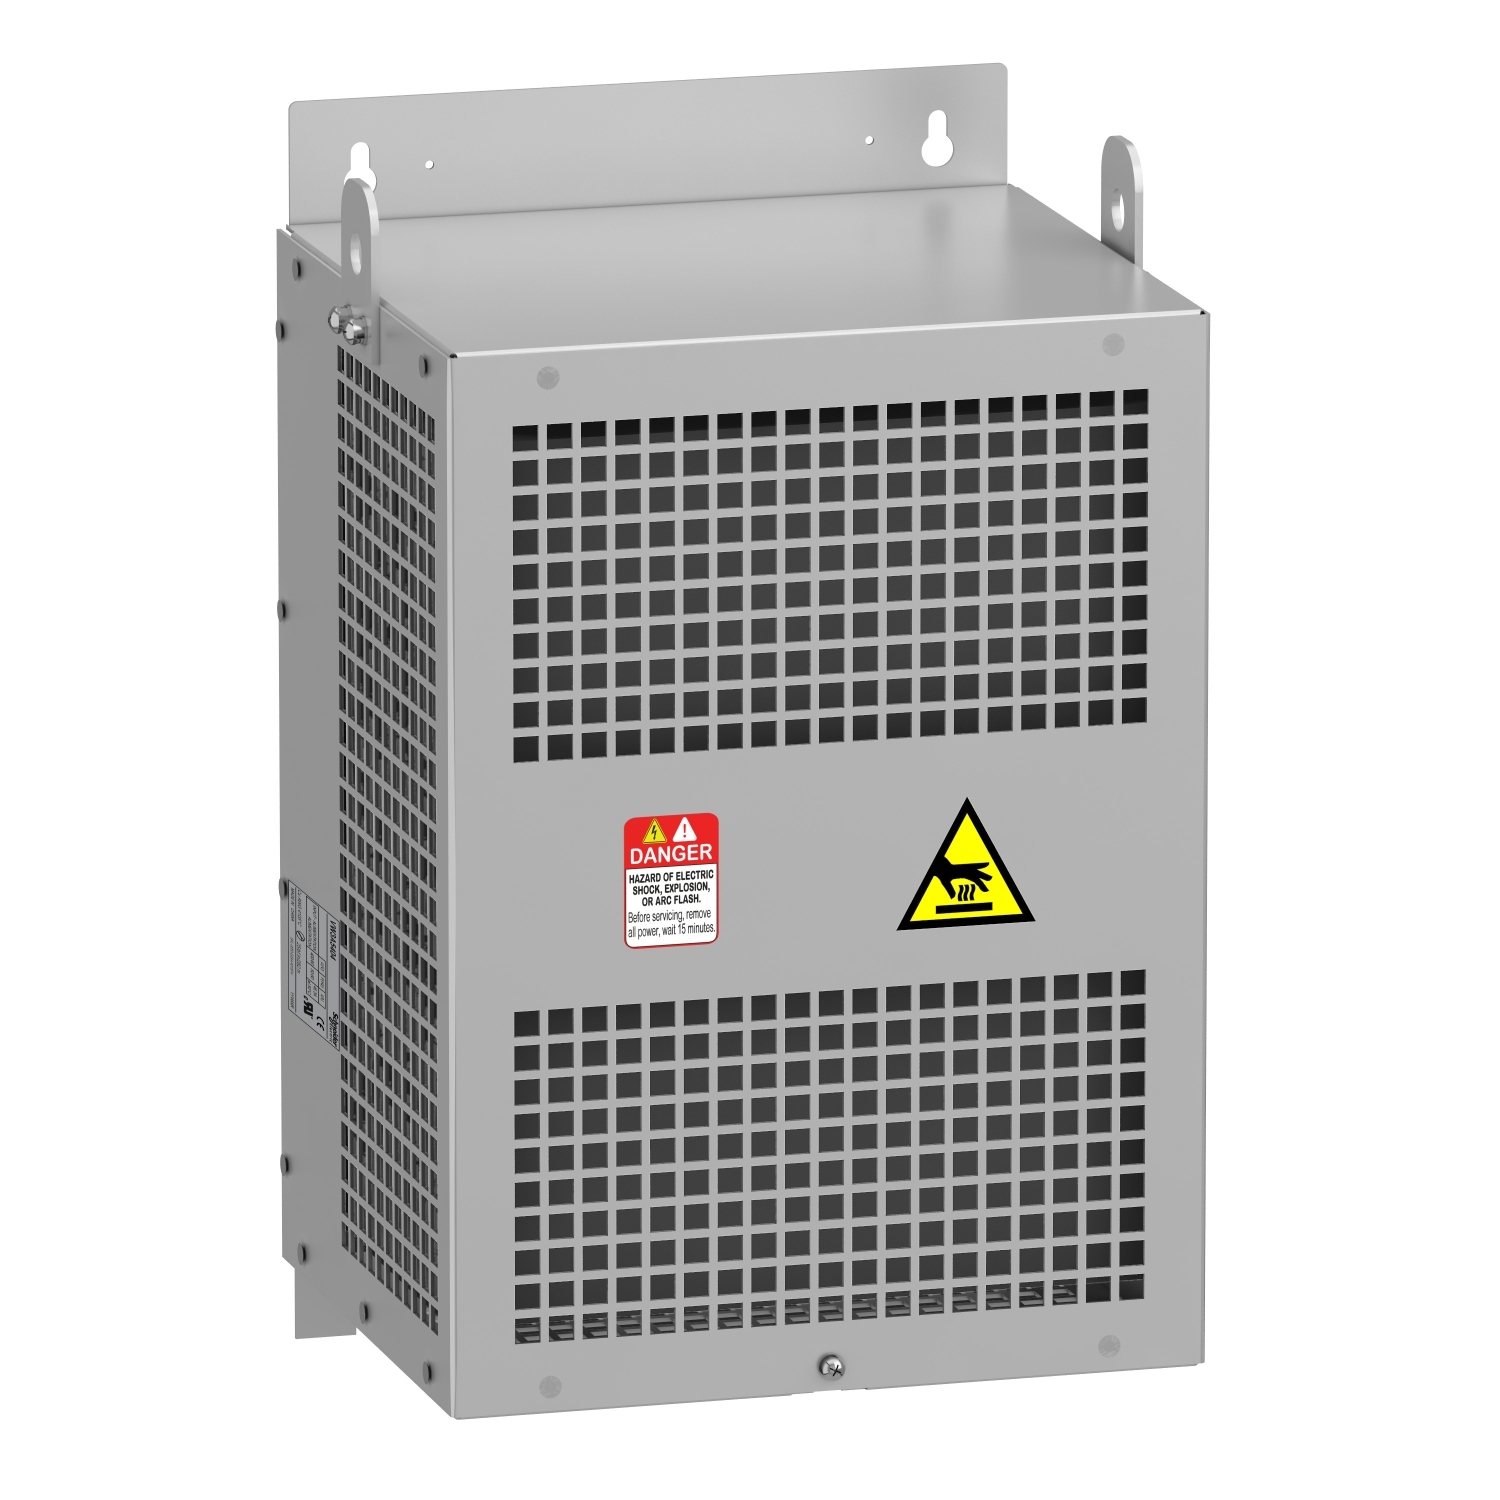 output sinus filter - 50 A - for variable speed drive